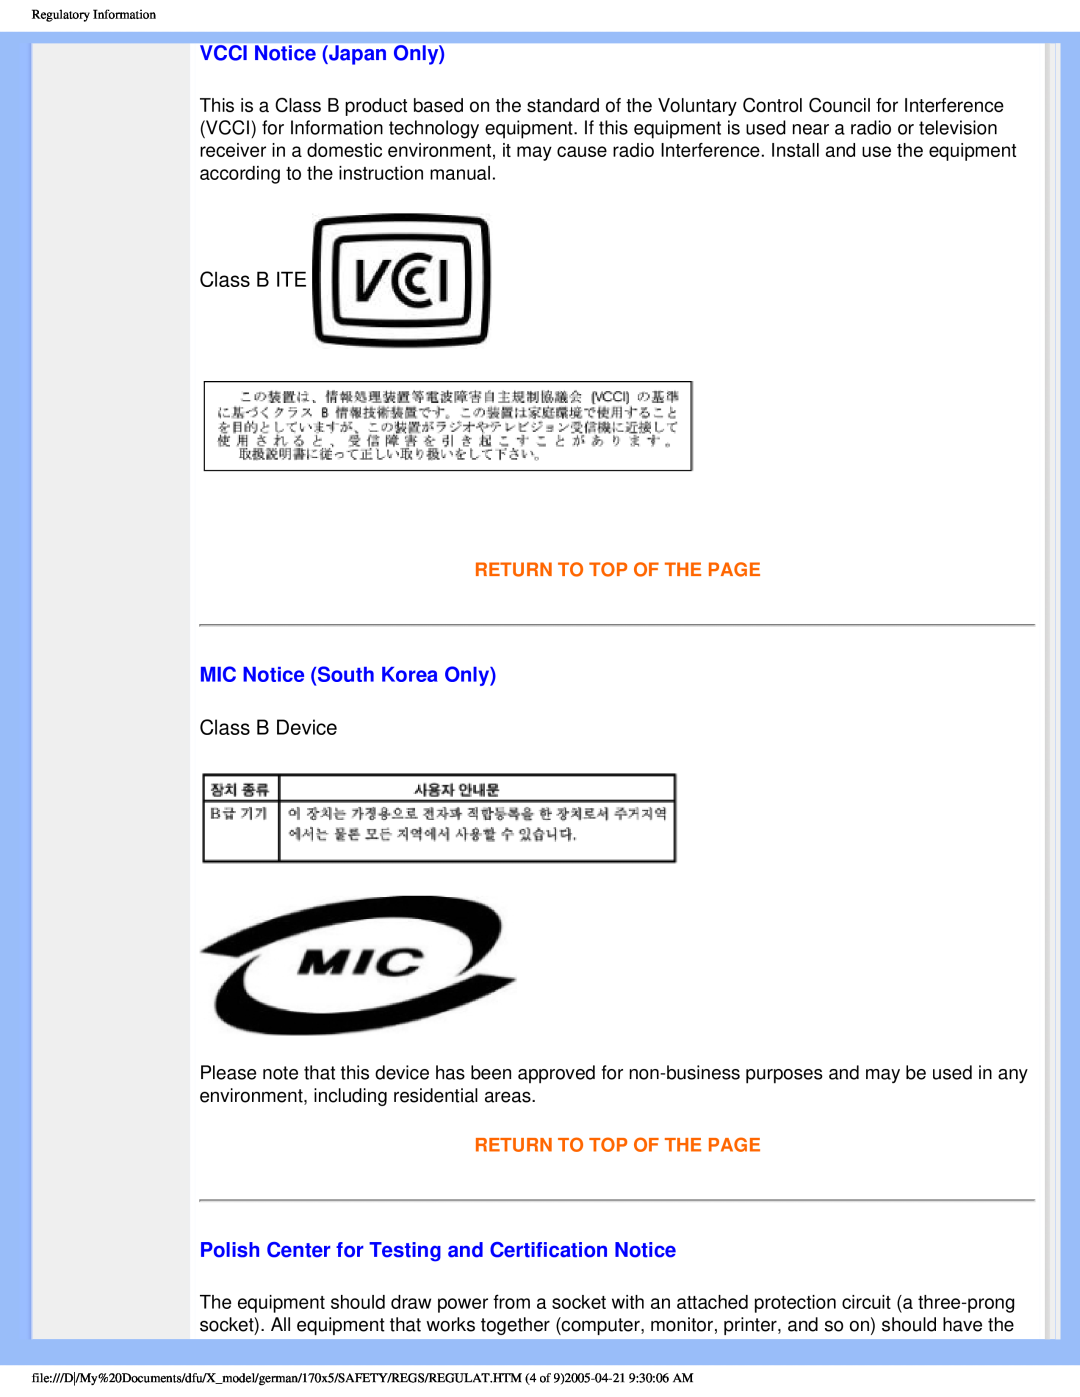 Philips 170X5FB/93 VCCI Notice Japan Only, MIC Notice South Korea Only, Polish Center for Testing and Certification Notice 